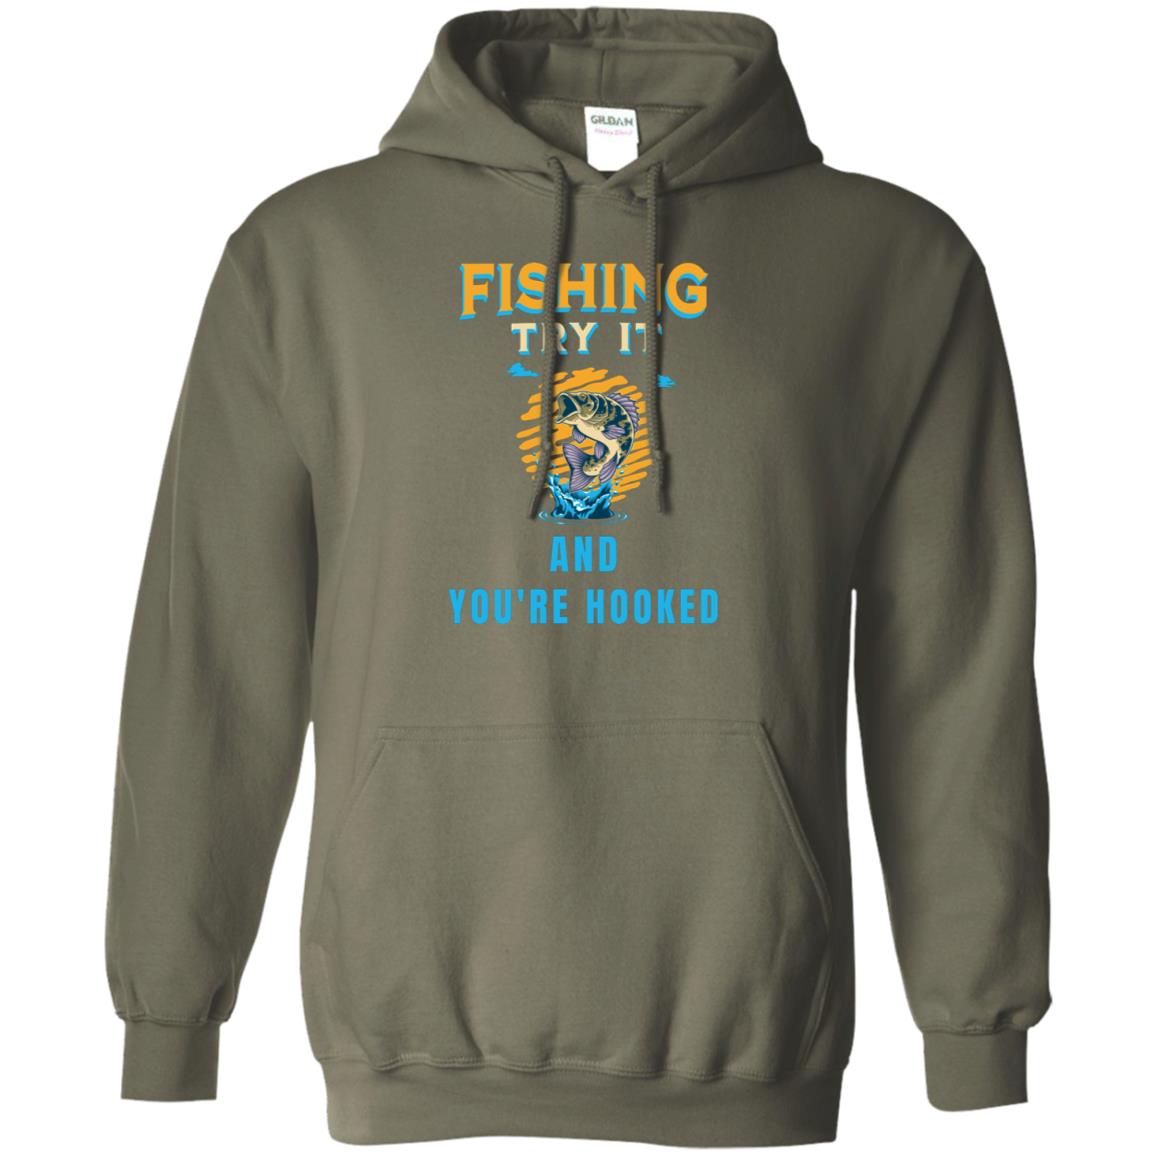 Fishing try it and you're hooked k hoodie military-green